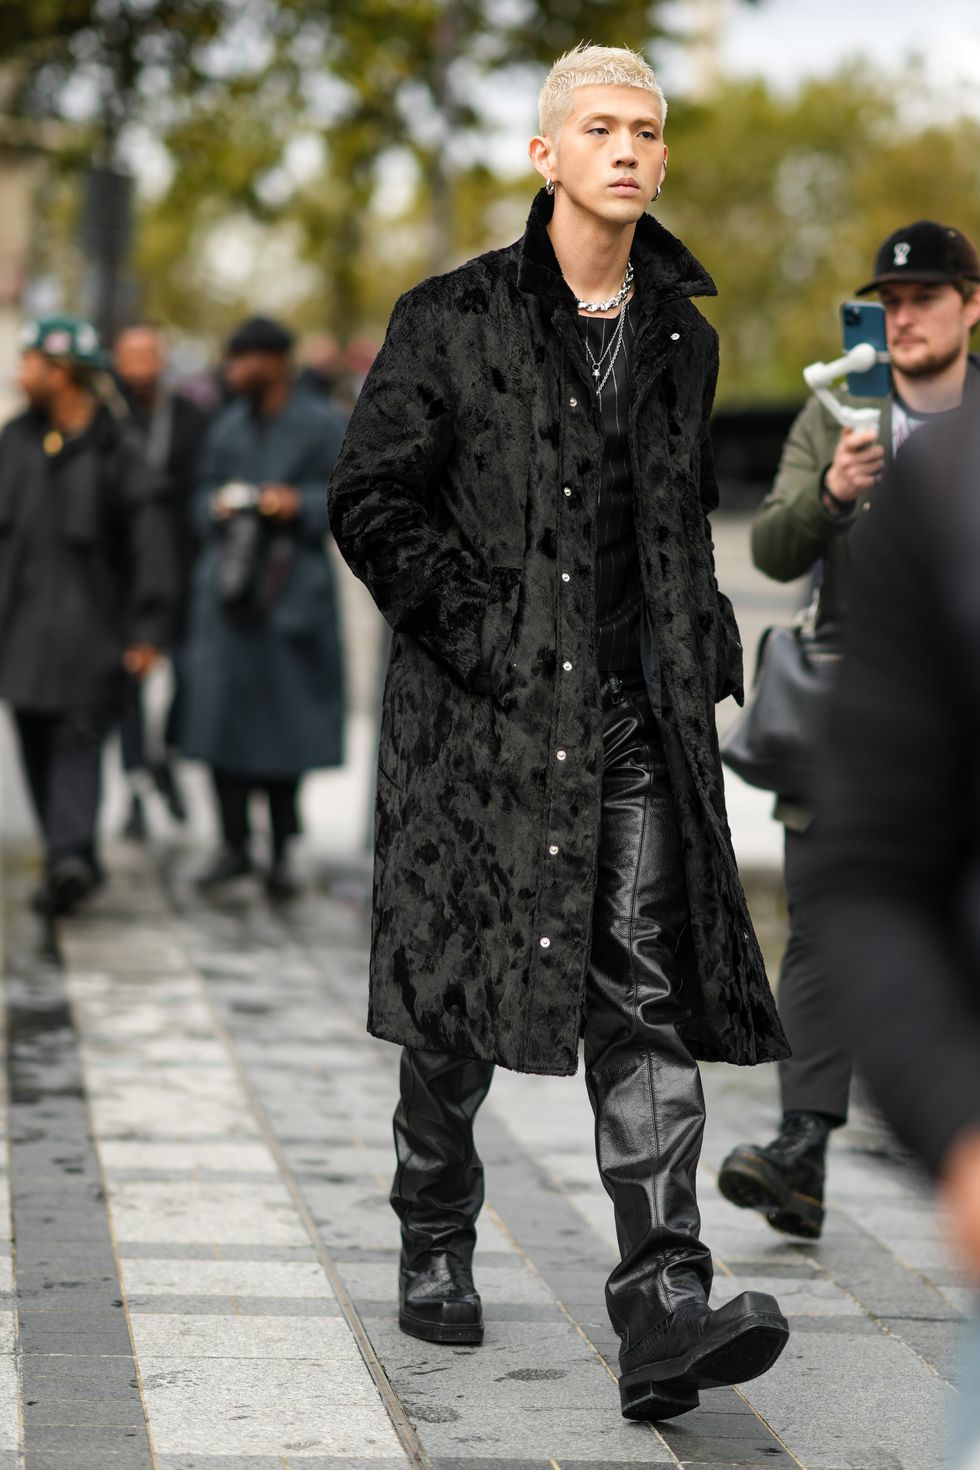 paris, france   october 03 matthew kim aka bm or big matthew, wears a black shiny faux fur coat, a necklaces, a black and white striped top, black leather pants, black leather boots, outside ludovic de saint sernin, during paris fashion week   womenswear spring summer 2022, on october 03, 2021 in paris, france photo by edward berthelotgetty images